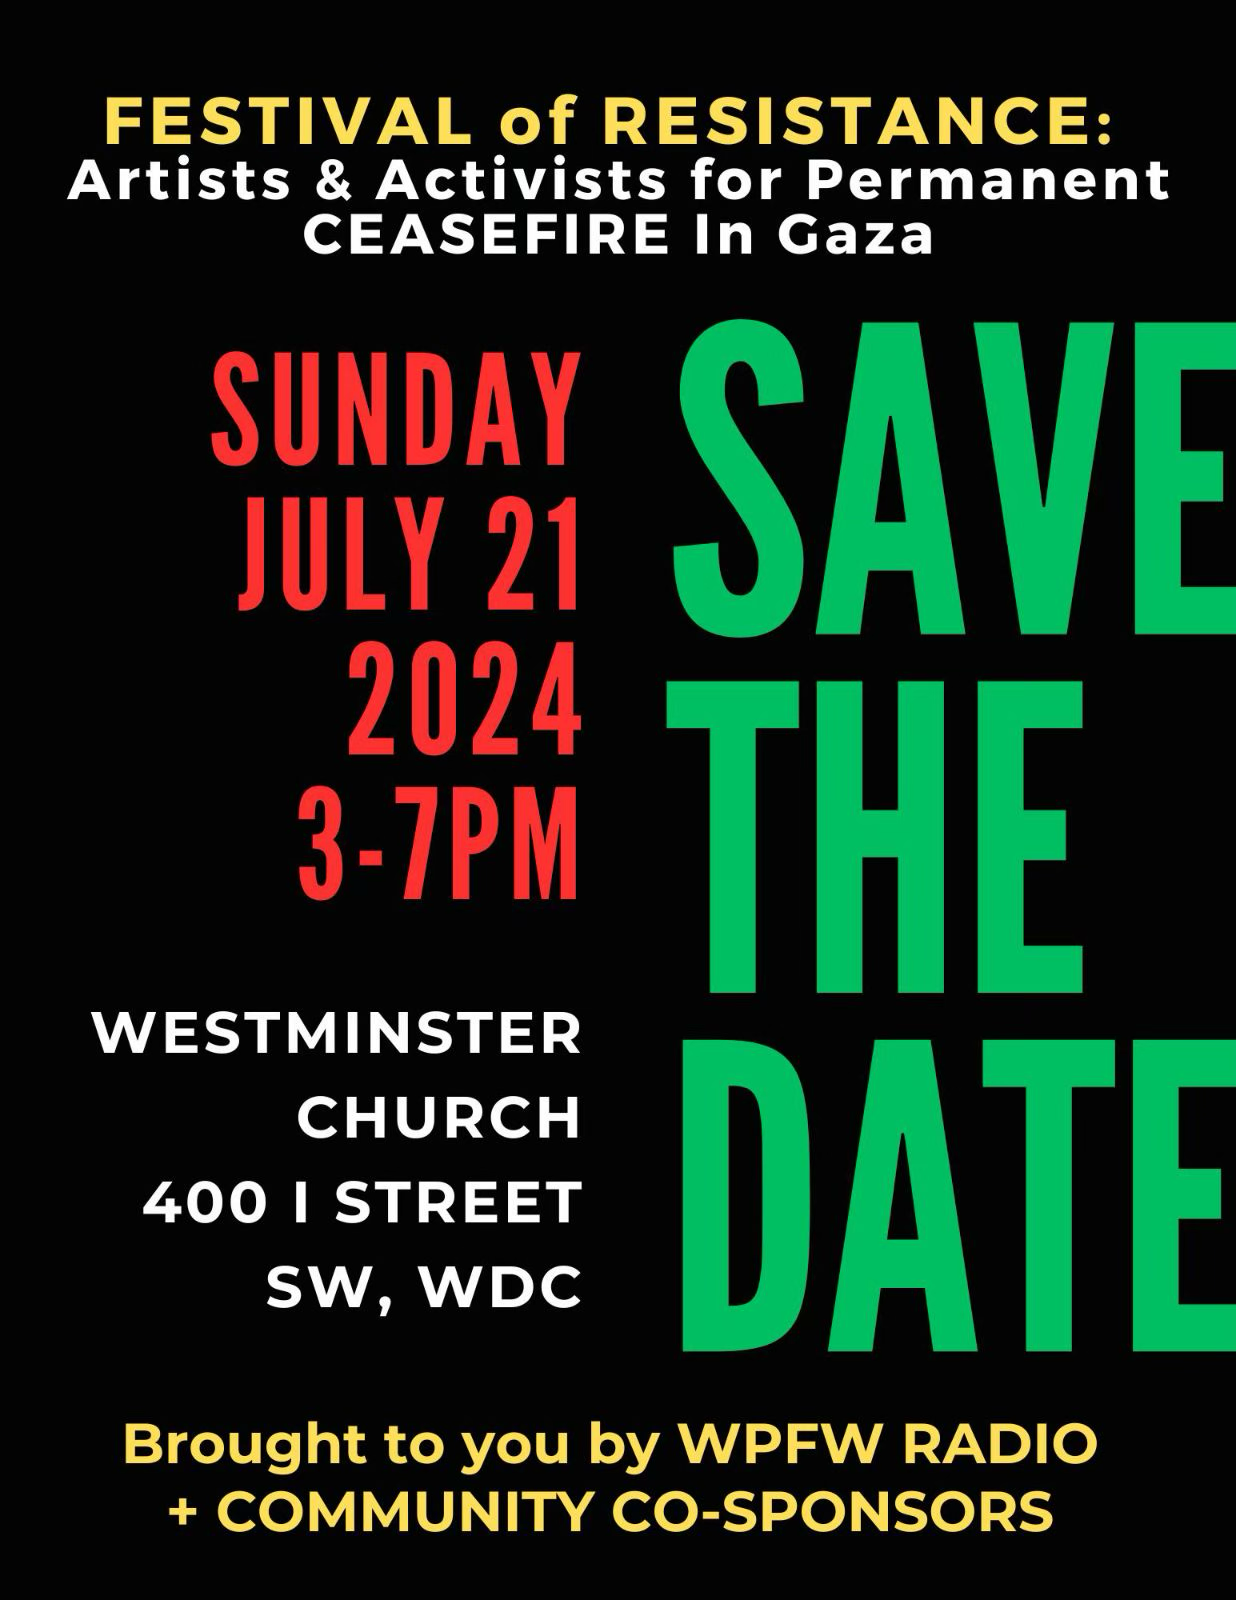 Festival of Resistance: Artists and Activists for Permanent Ceasefire in Gaza